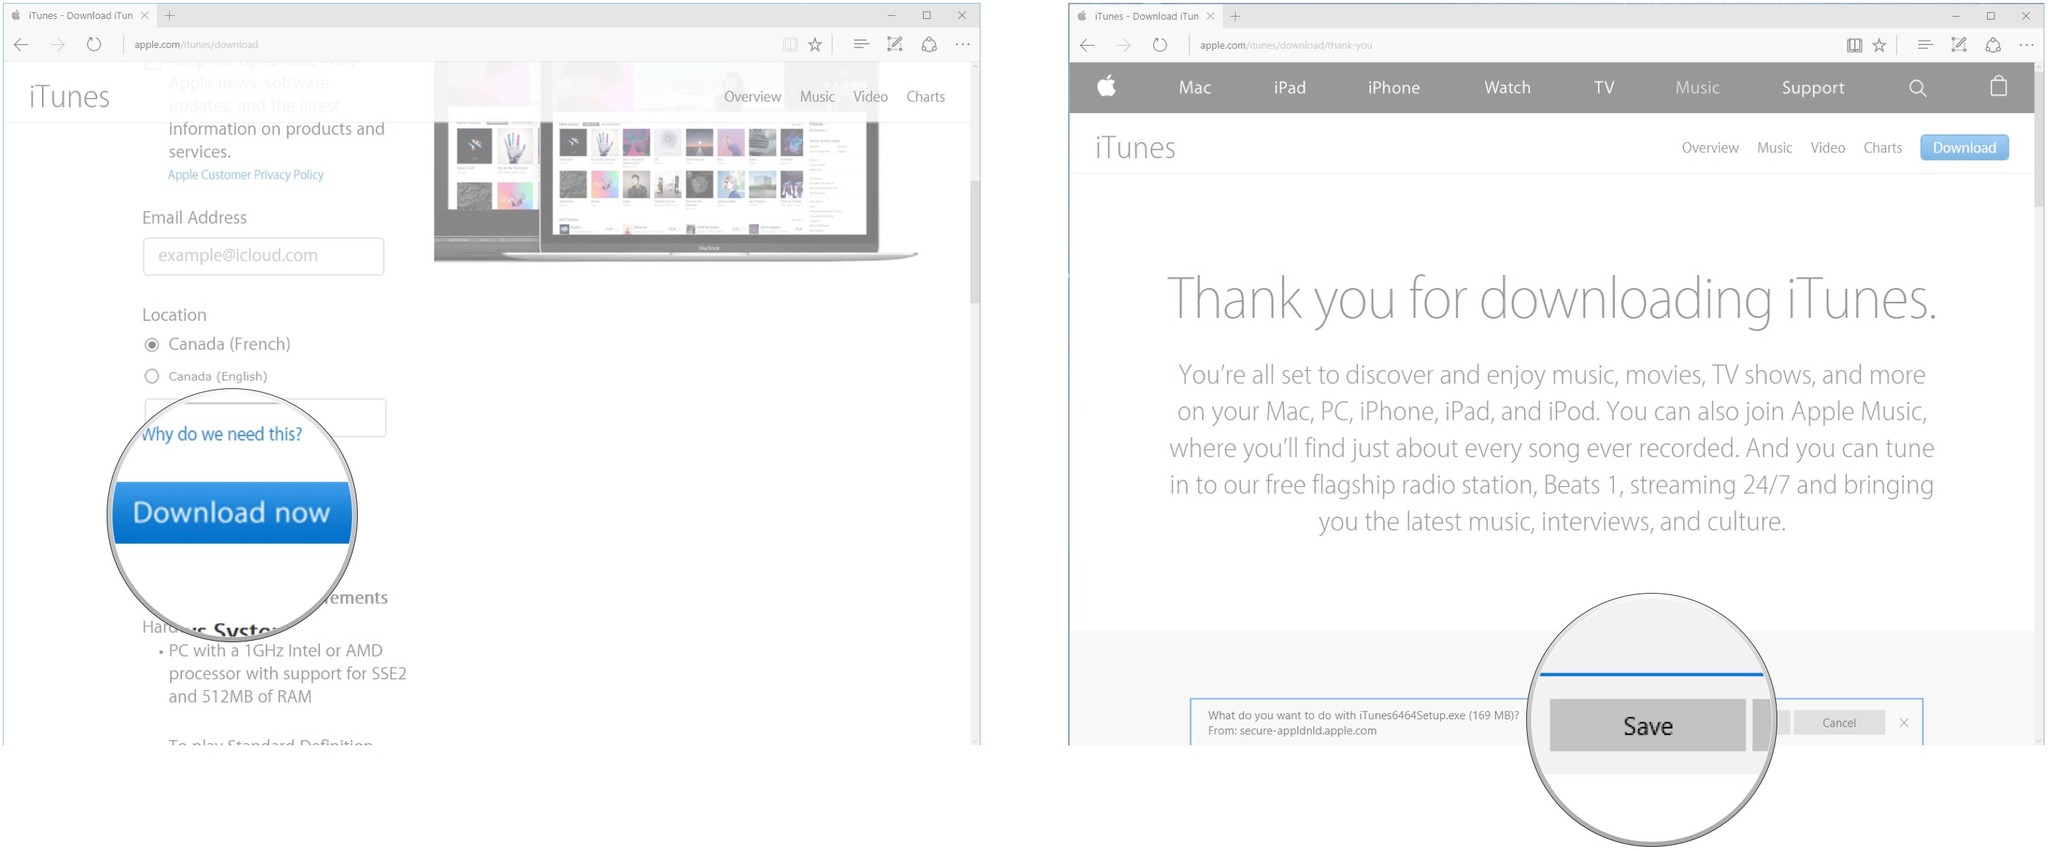 Itunes free download for windows 8